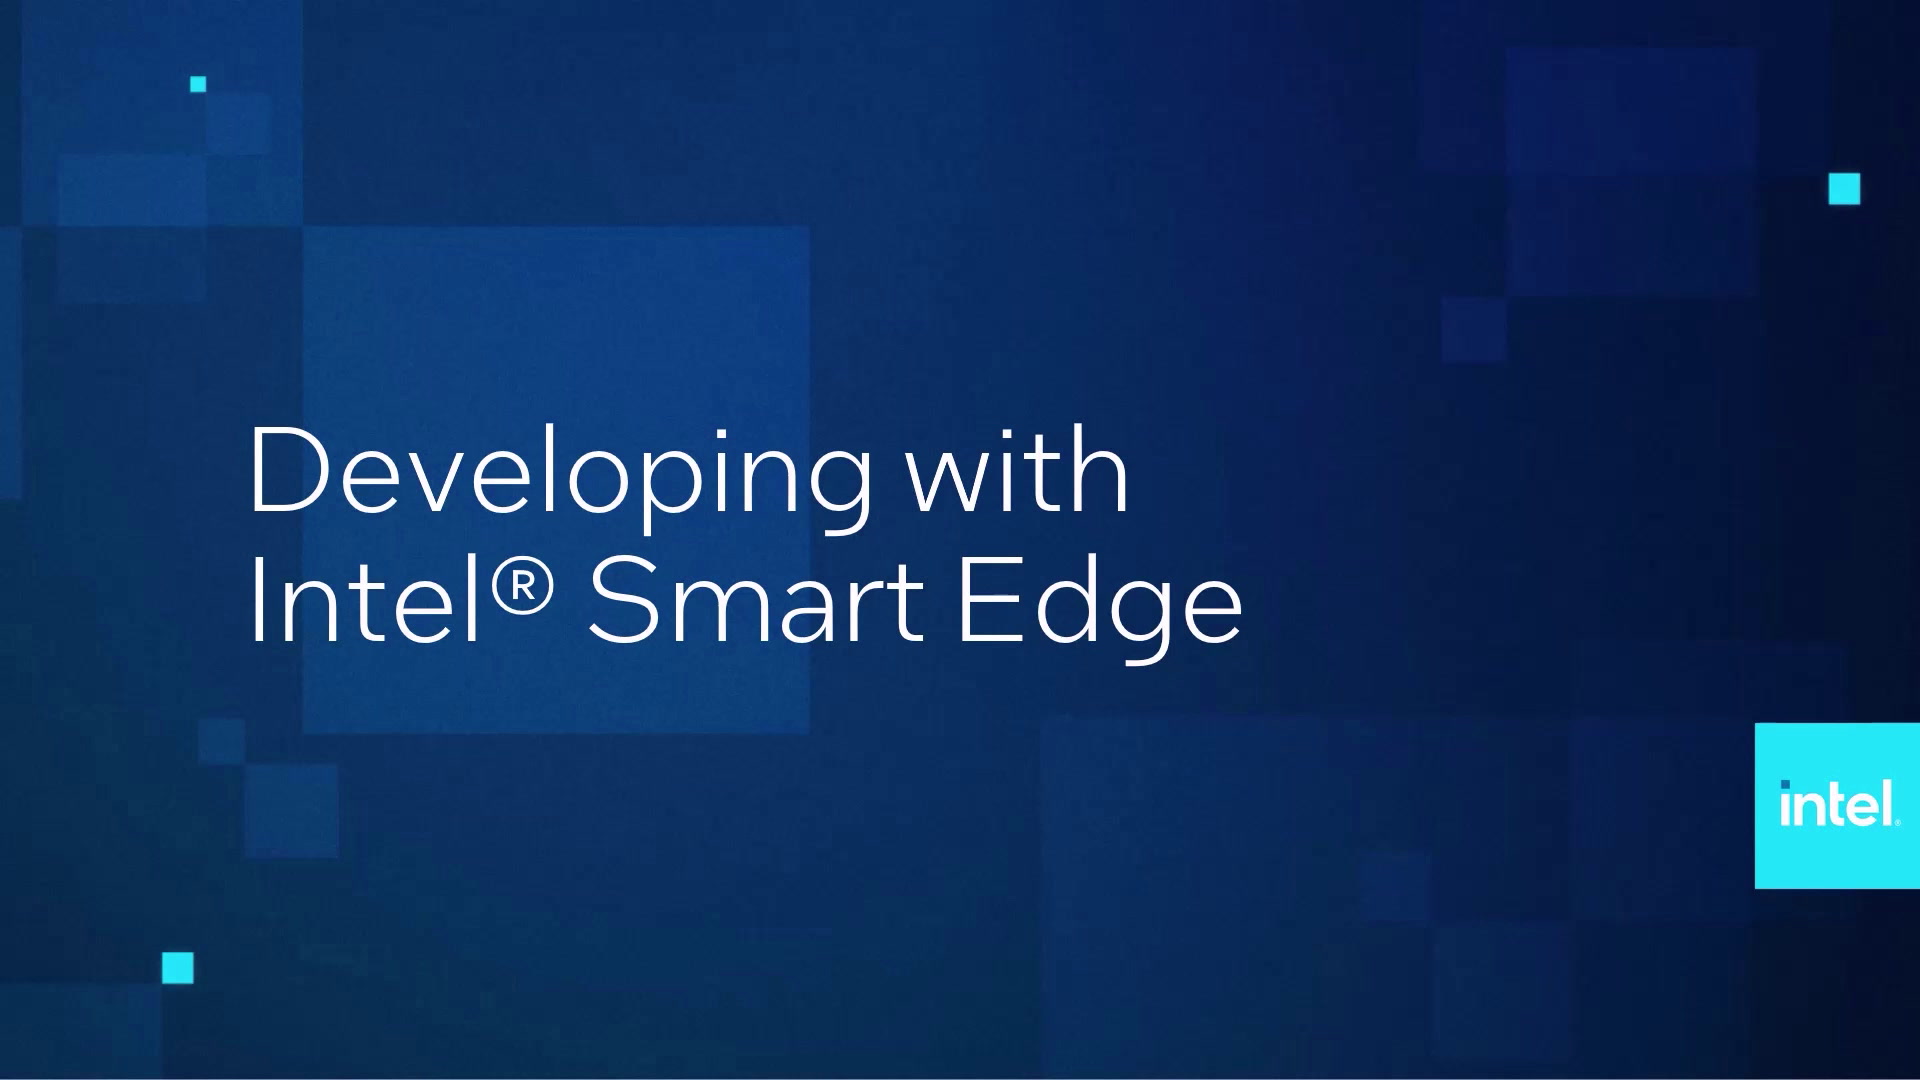 Developing with Intel® Smart Edge